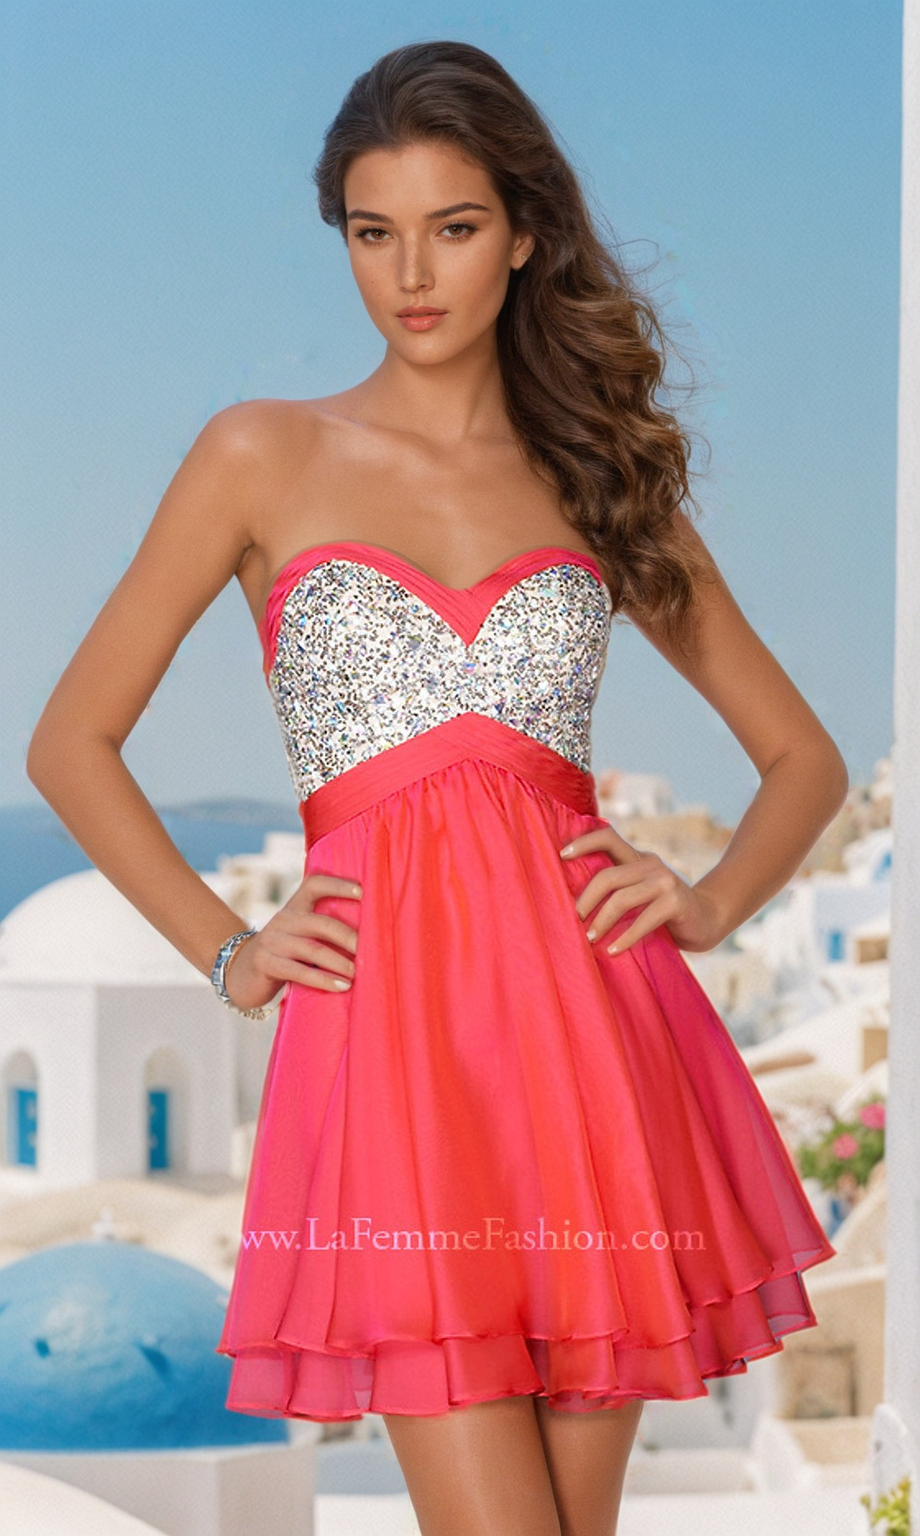 Strapless Short Tiered Party Dress by La Femme